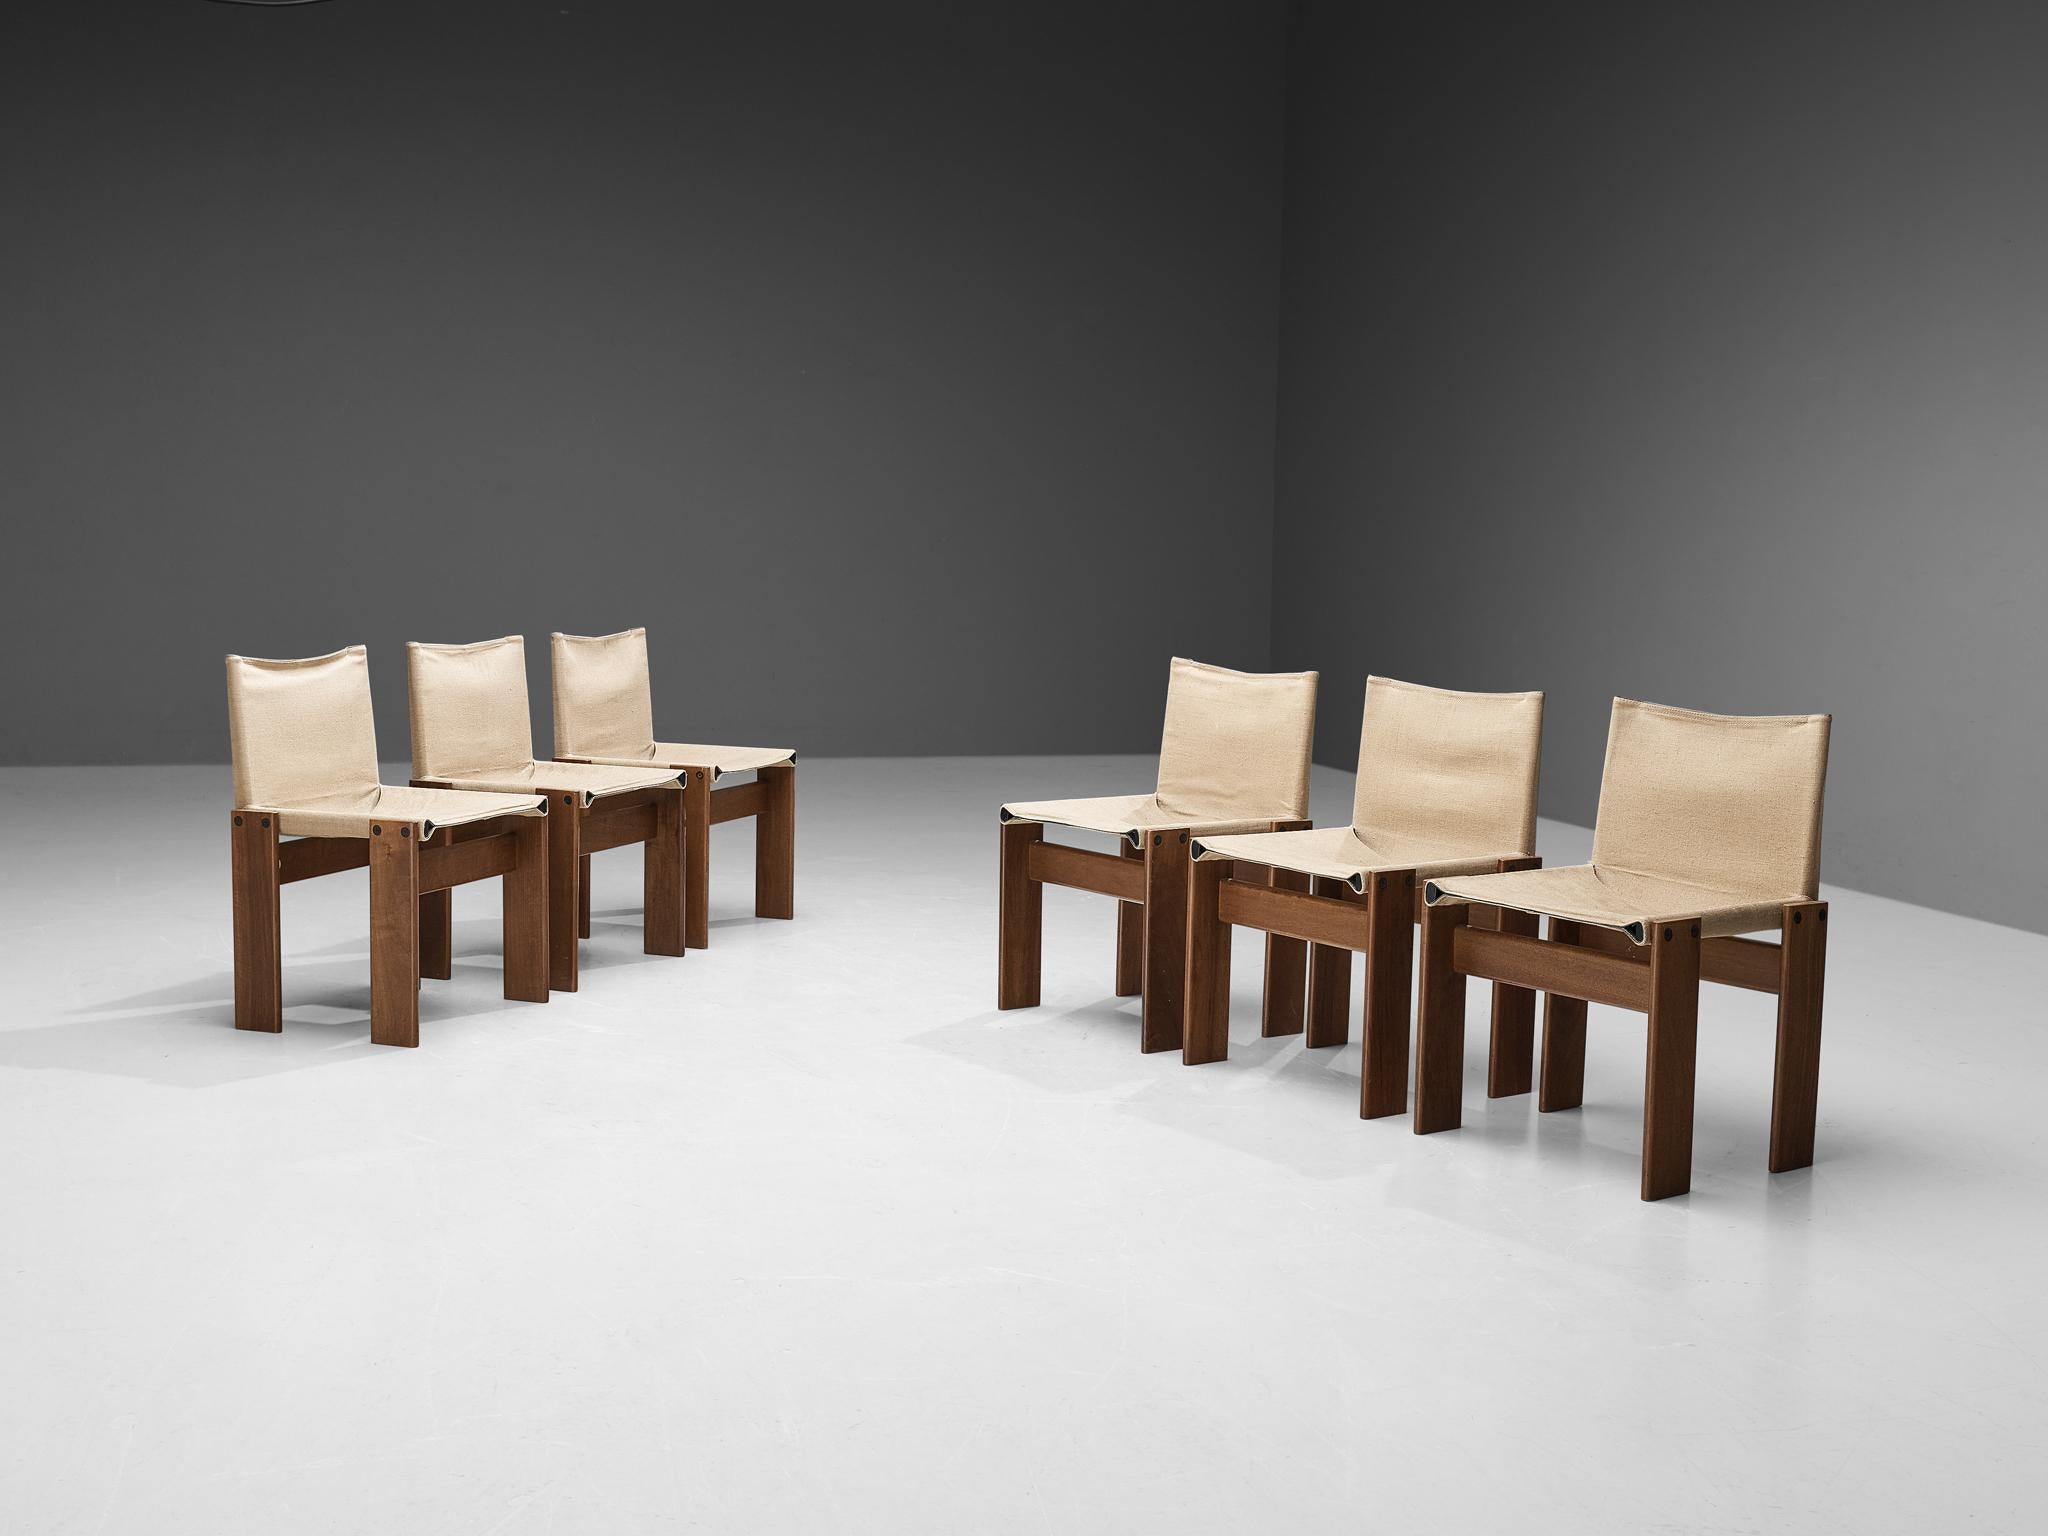 Afra & Tobia Scarpa for Molteni, set of six 'Monk' dining chairs, walnut, canvas, Italy, 1974.

The off-white canvas forms a striking combination with the walnut wood. Interesting is the 'flat' shape of this chair where the designer has chosen to